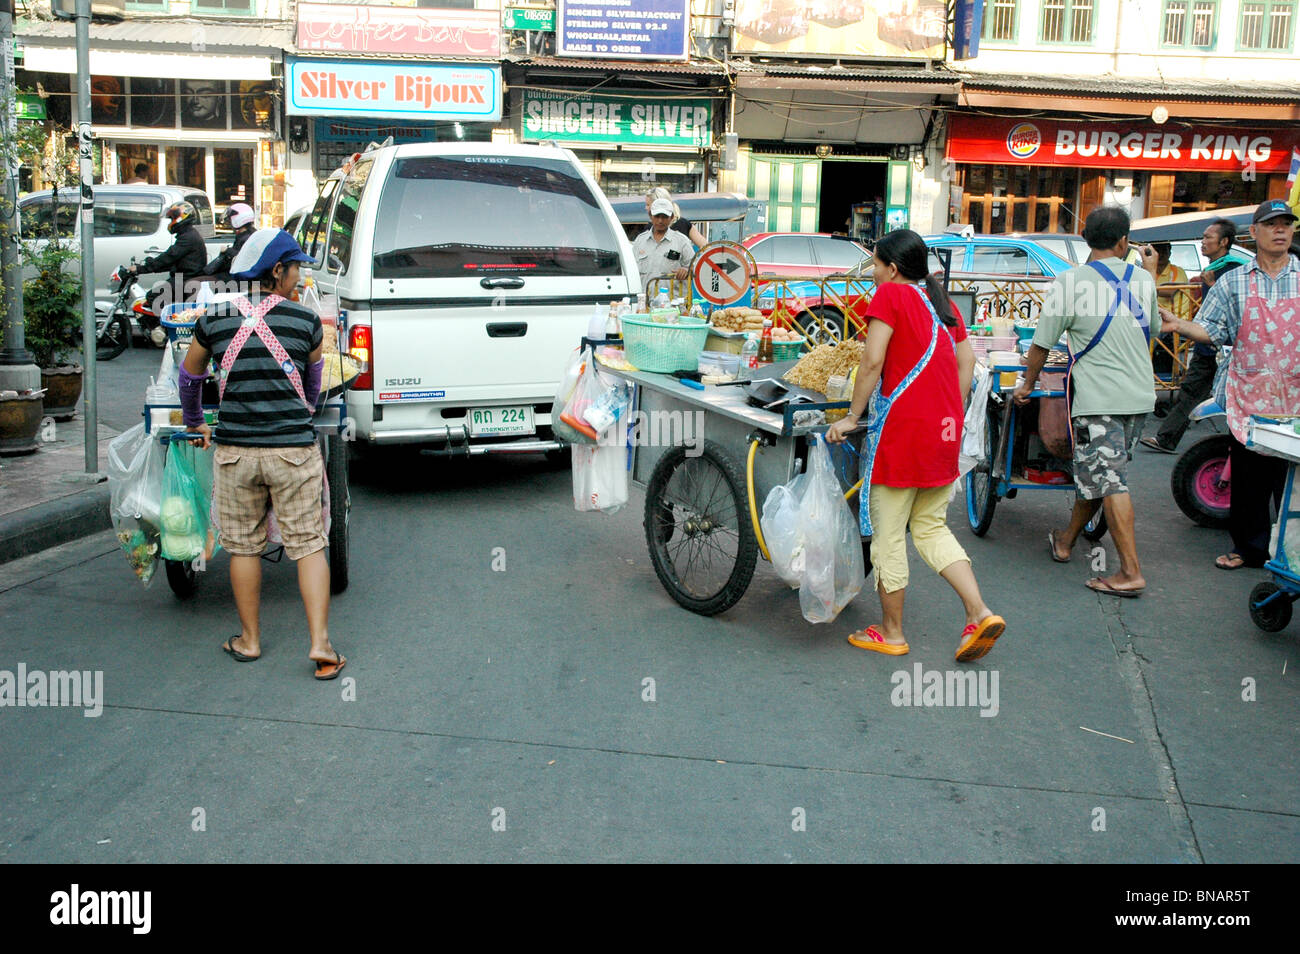 Unlicensed Street Food Vendors retreat temporarly during police crack down- Bangkok Thailand Stock Photo